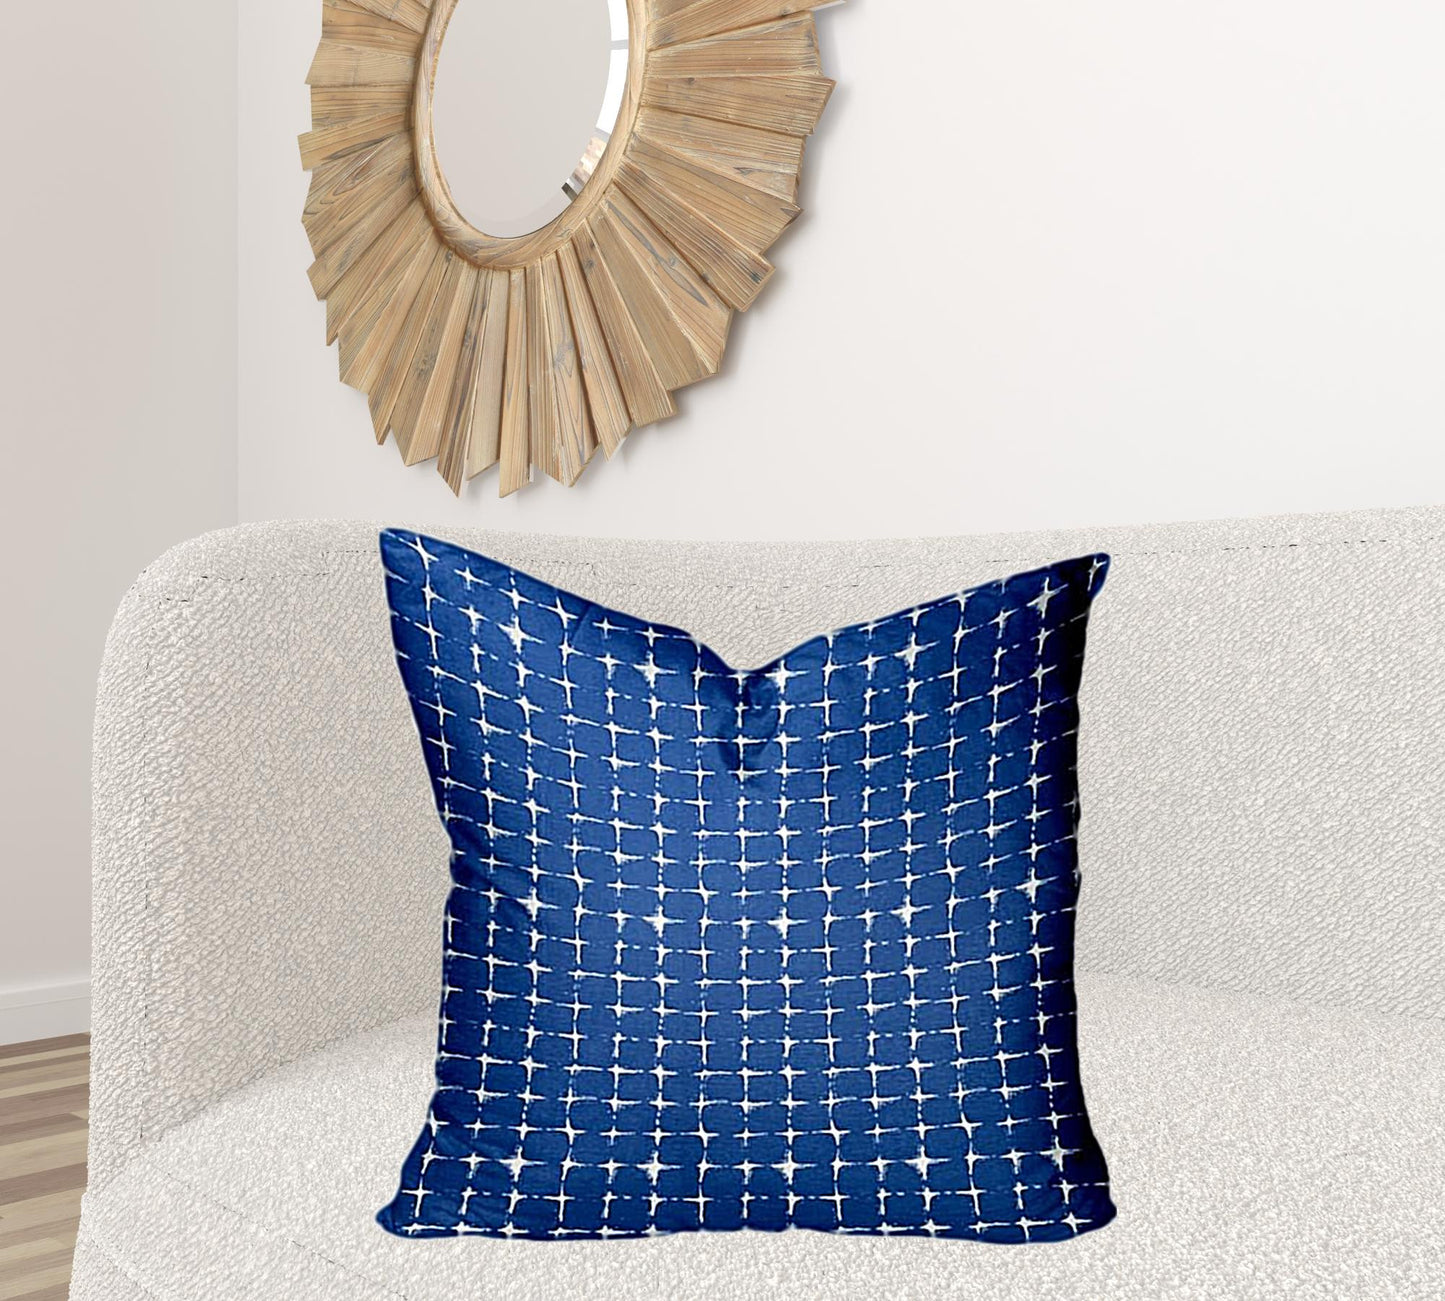 26" X 26" Blue And White Enveloped Gingham Throw Indoor Outdoor Pillow Cover